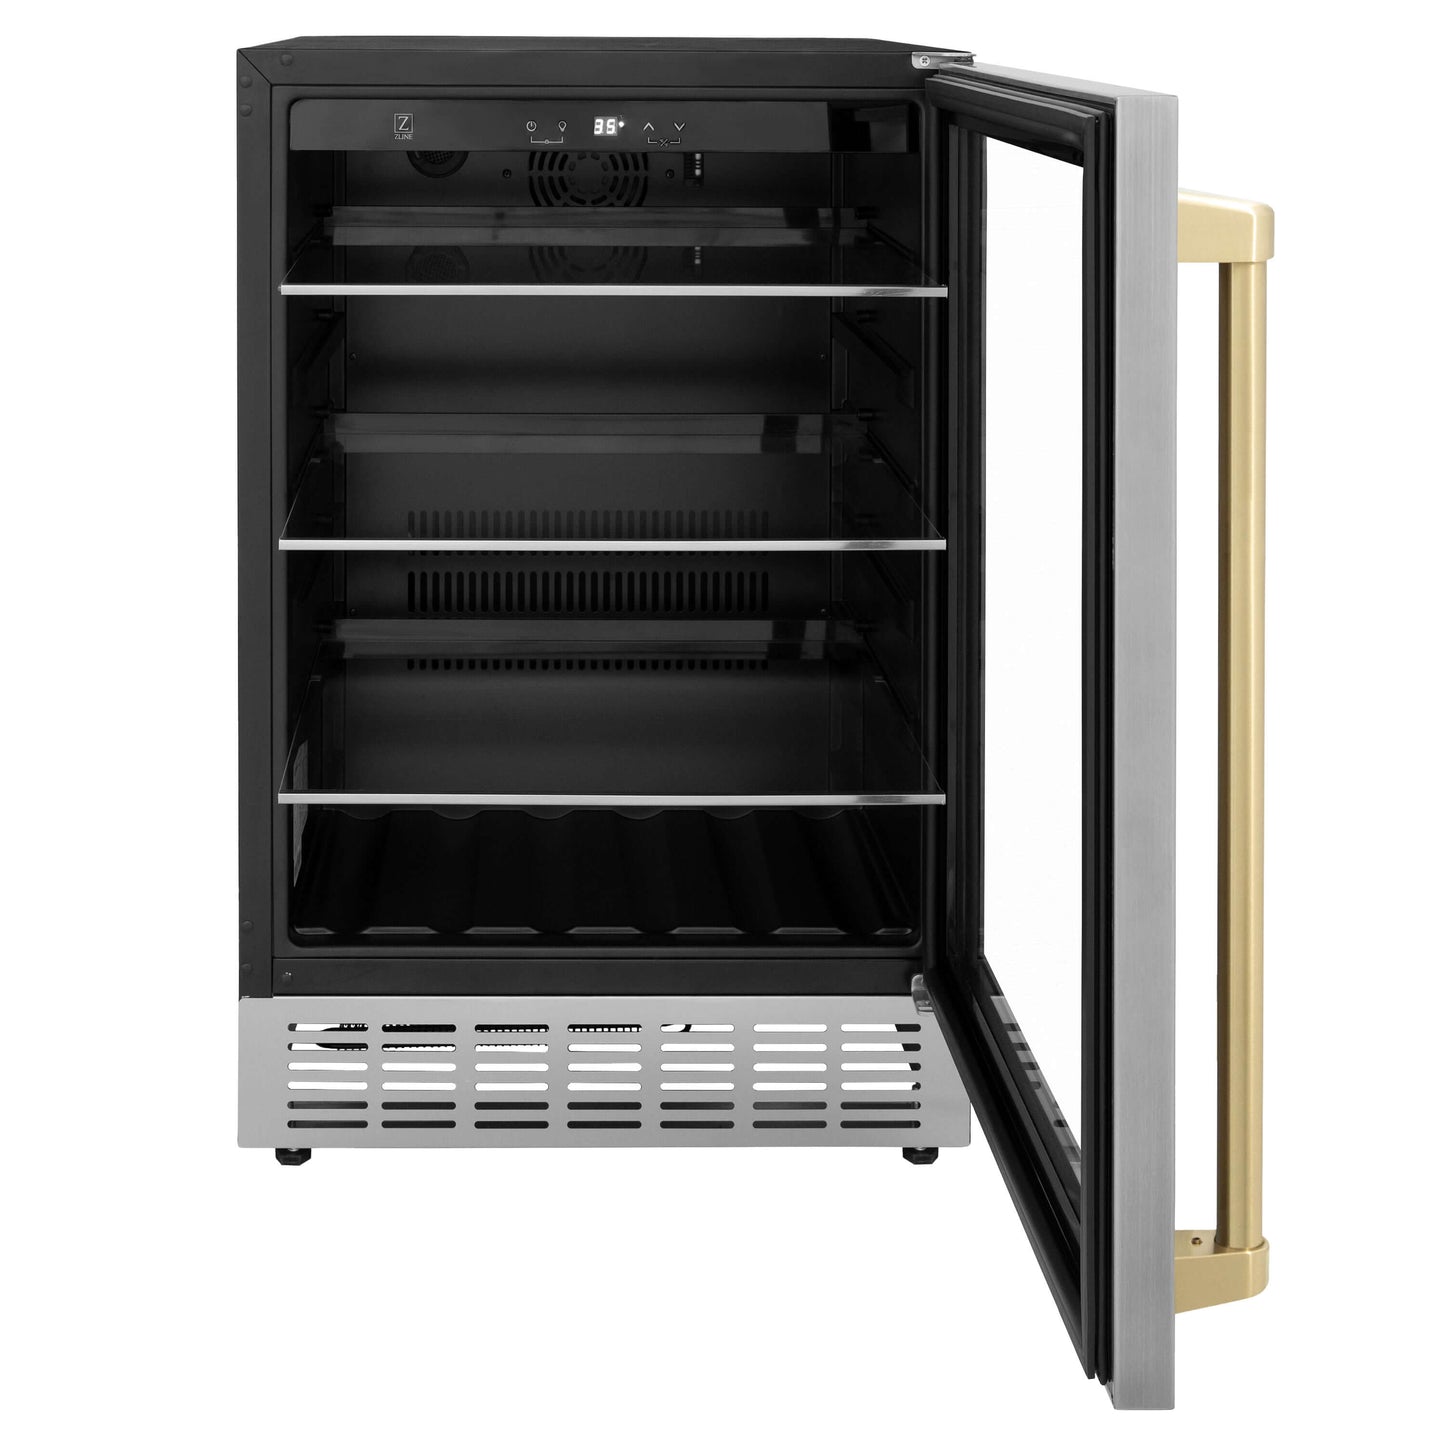 ZLINE 24 in. Monument Autograph Edition 154 Can Beverage Fridge in Stainless Steel with Champagne Bronze Accents (RBVZ-US-24-CB)